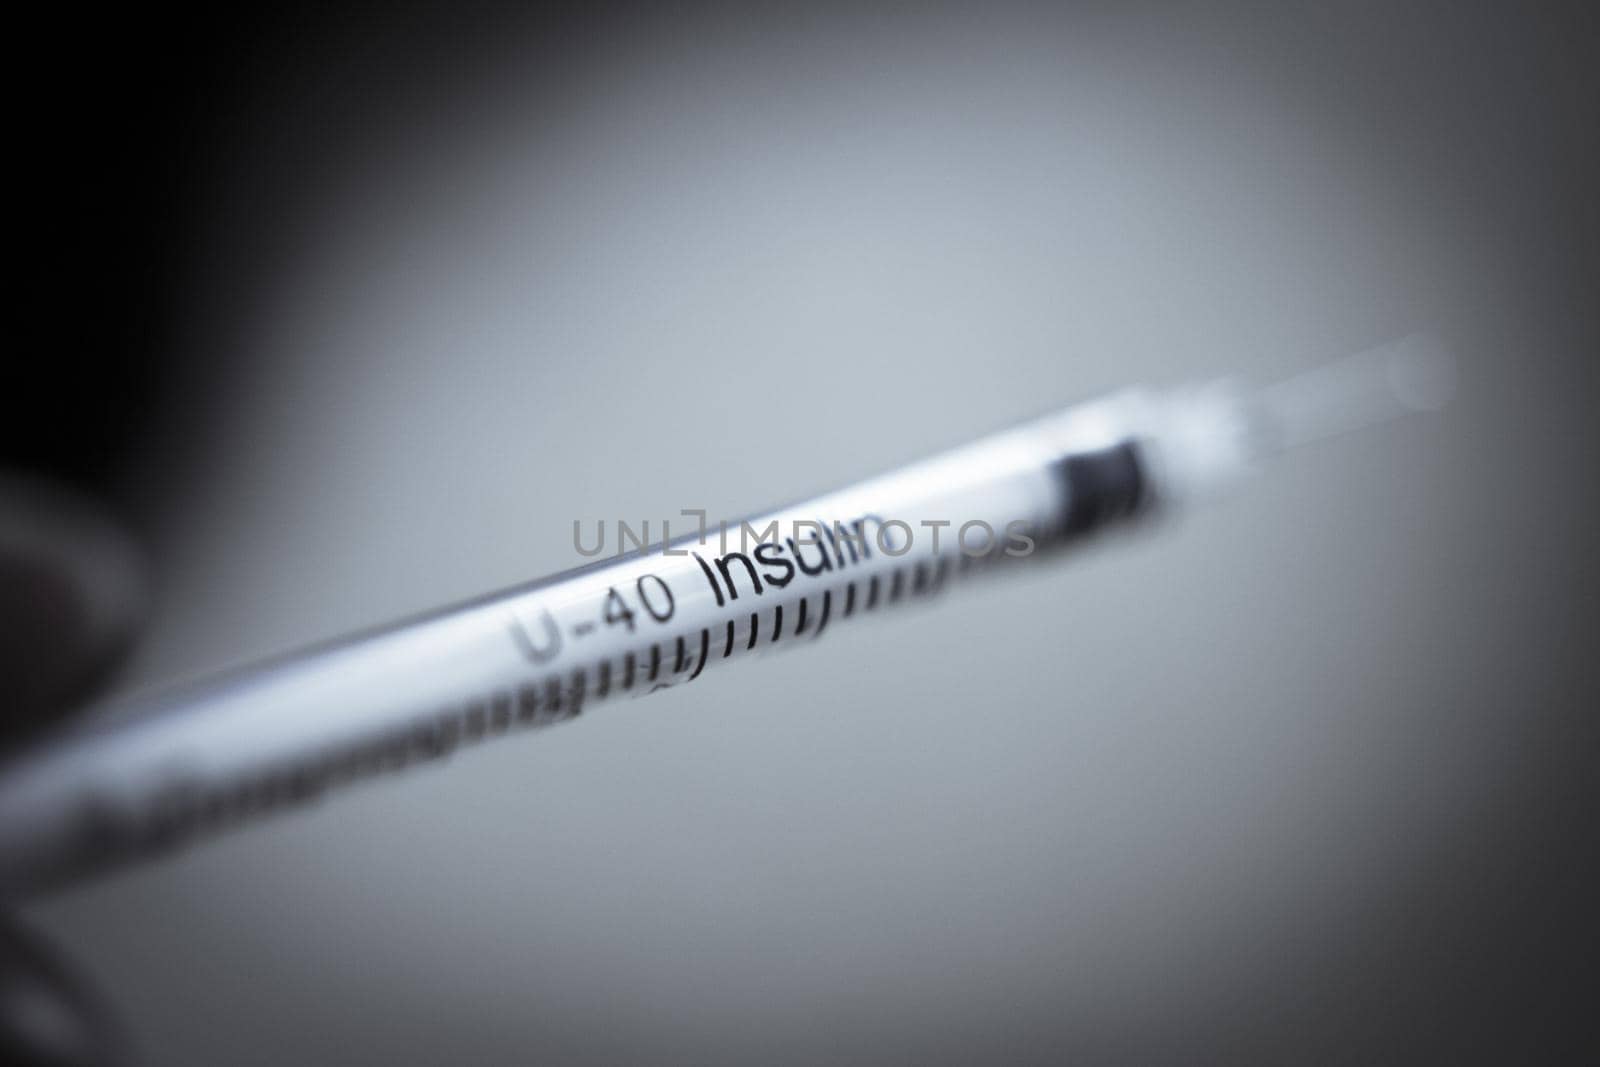 Insulin injecting syringe held by nurses hand. Copy space